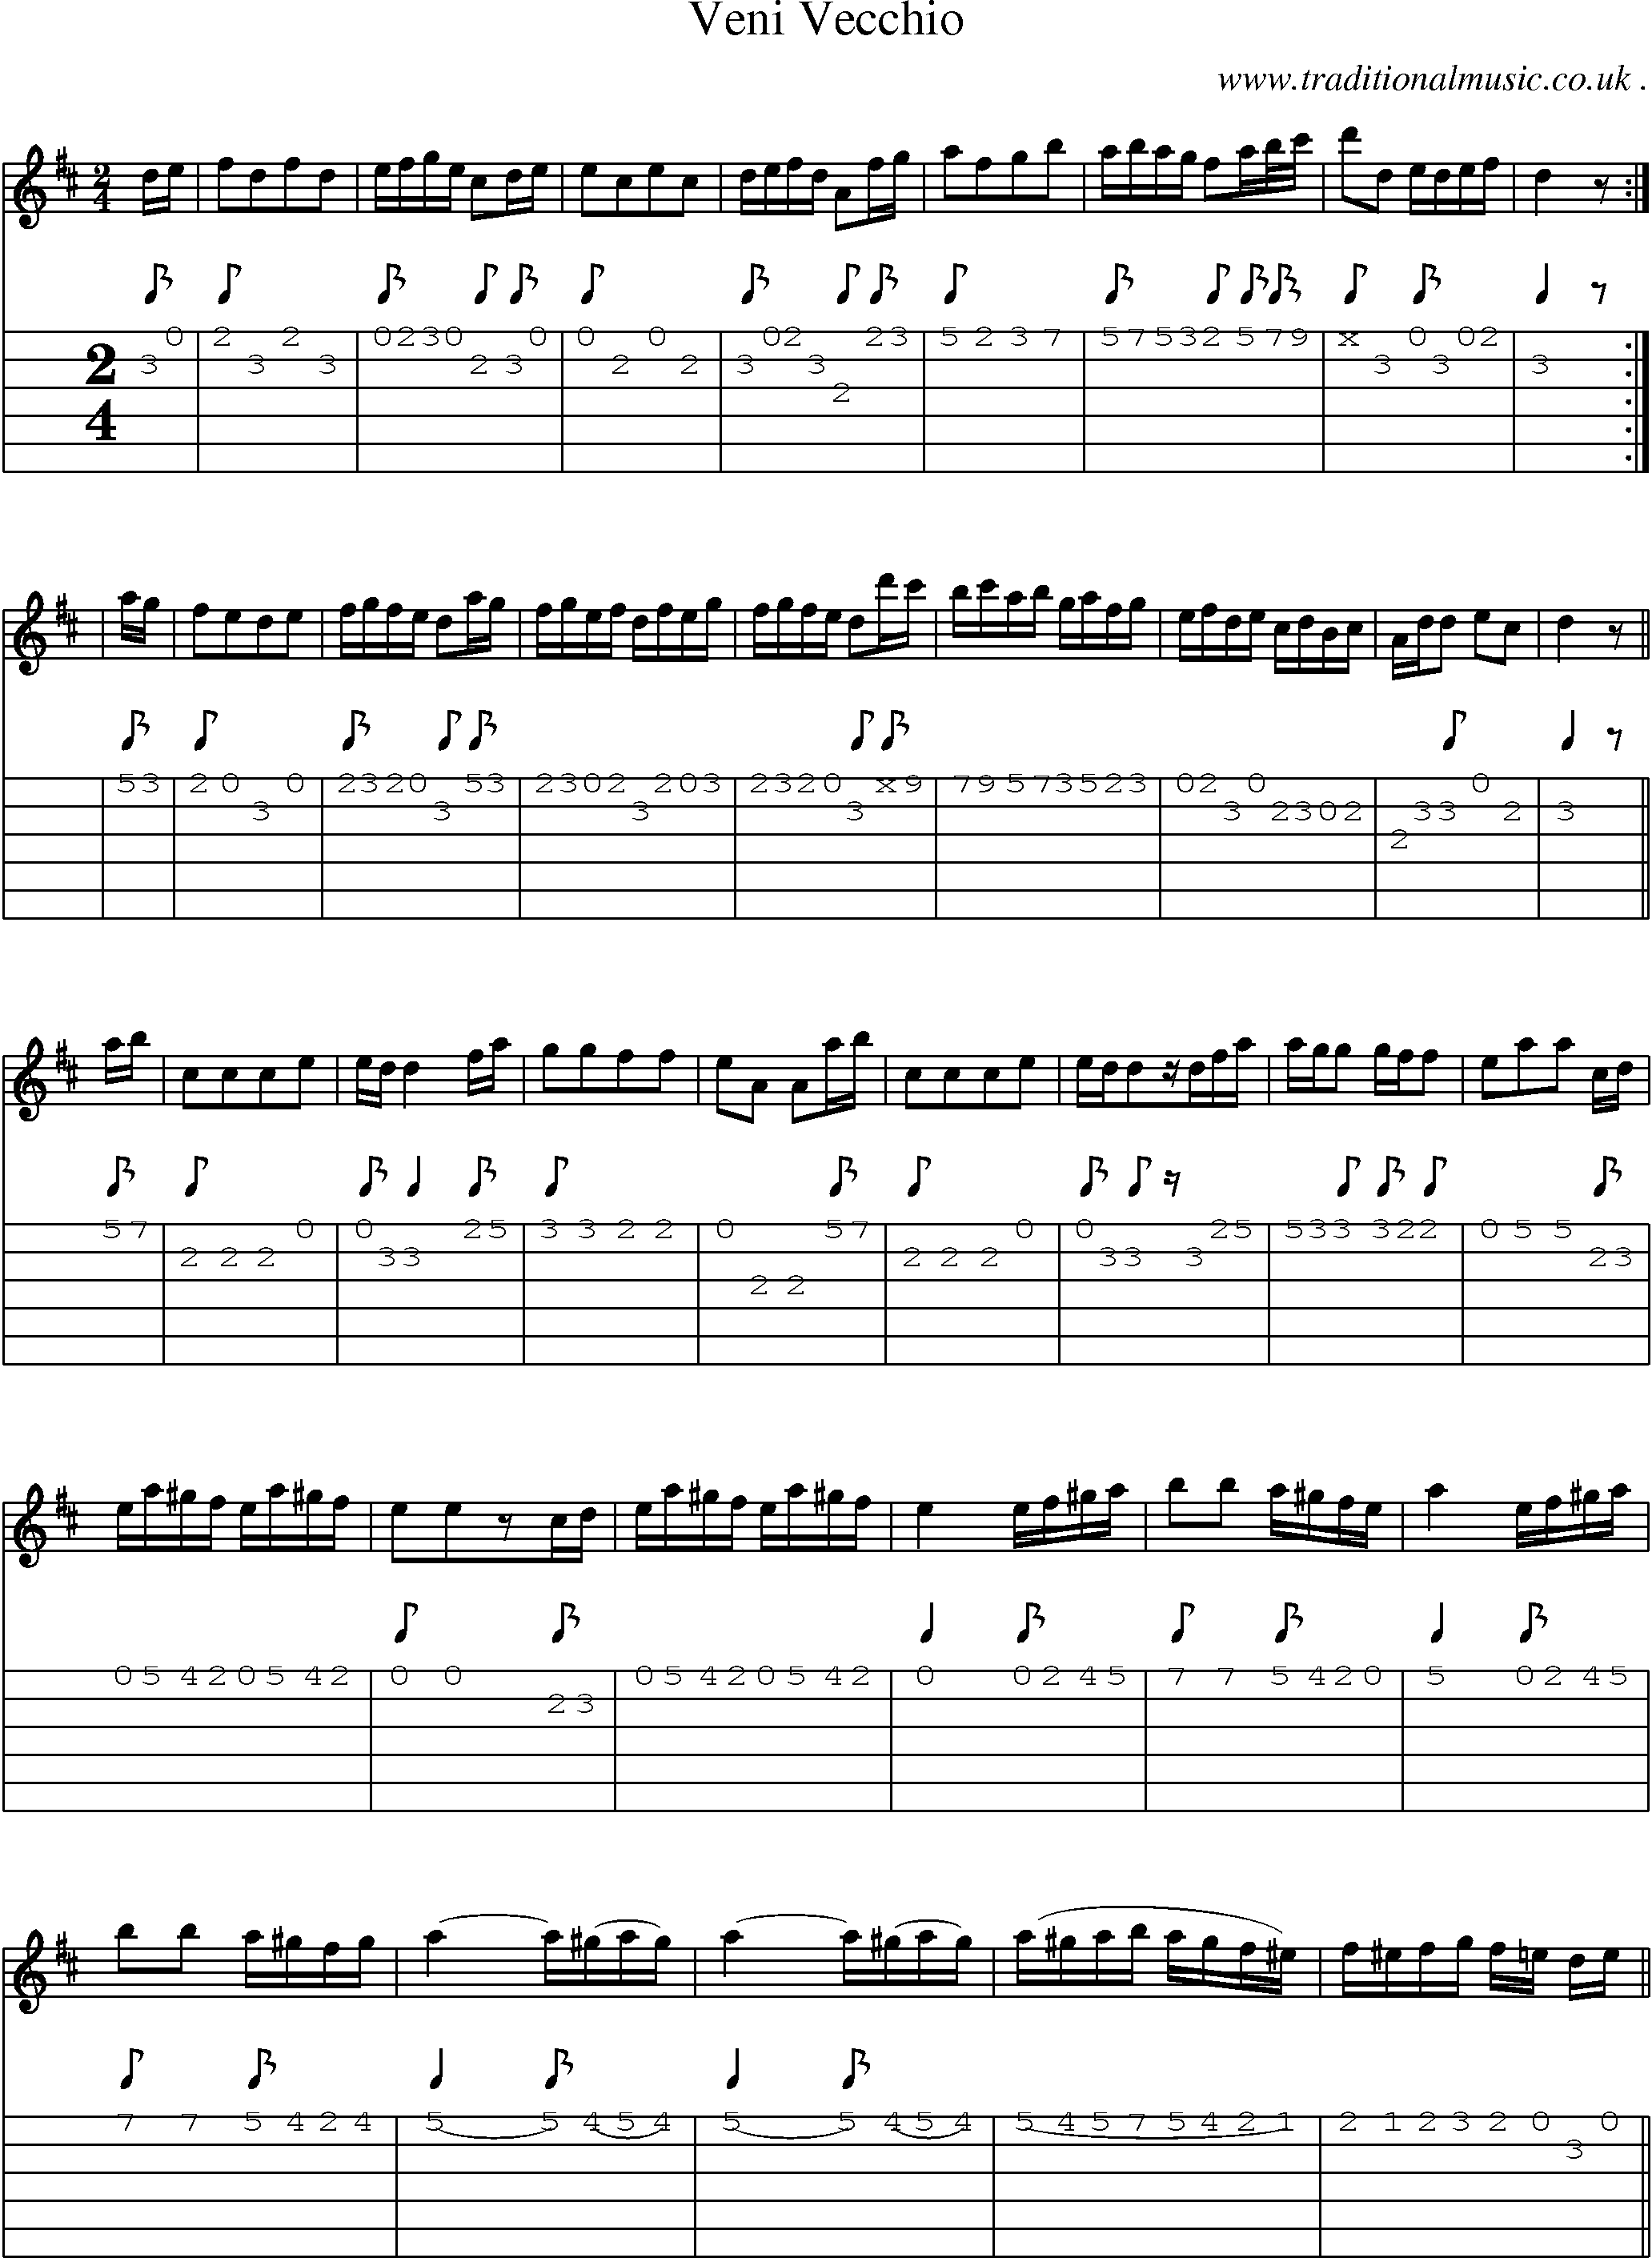 Sheet-Music and Guitar Tabs for Veni Vecchio